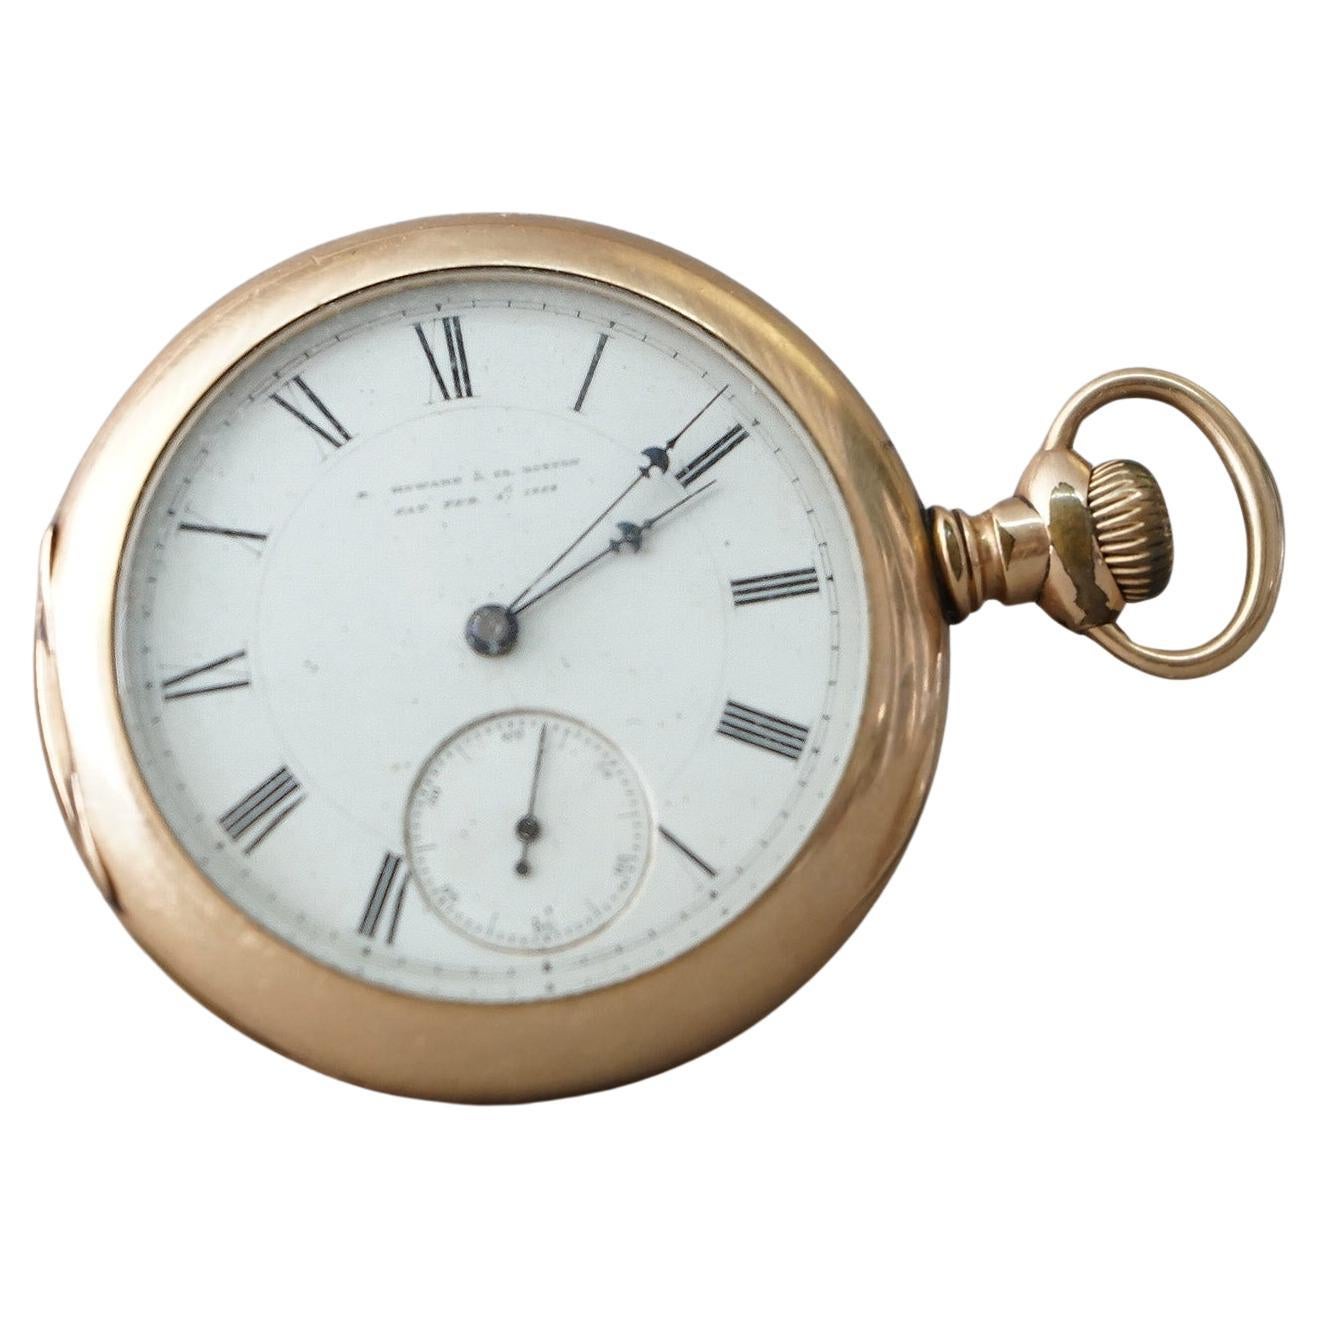 Antique E. Howard & Co. Pocket Watch, Boston Pat Feb 4th 1860, Interior Marked C.W.C. Co. 

Measures - 3